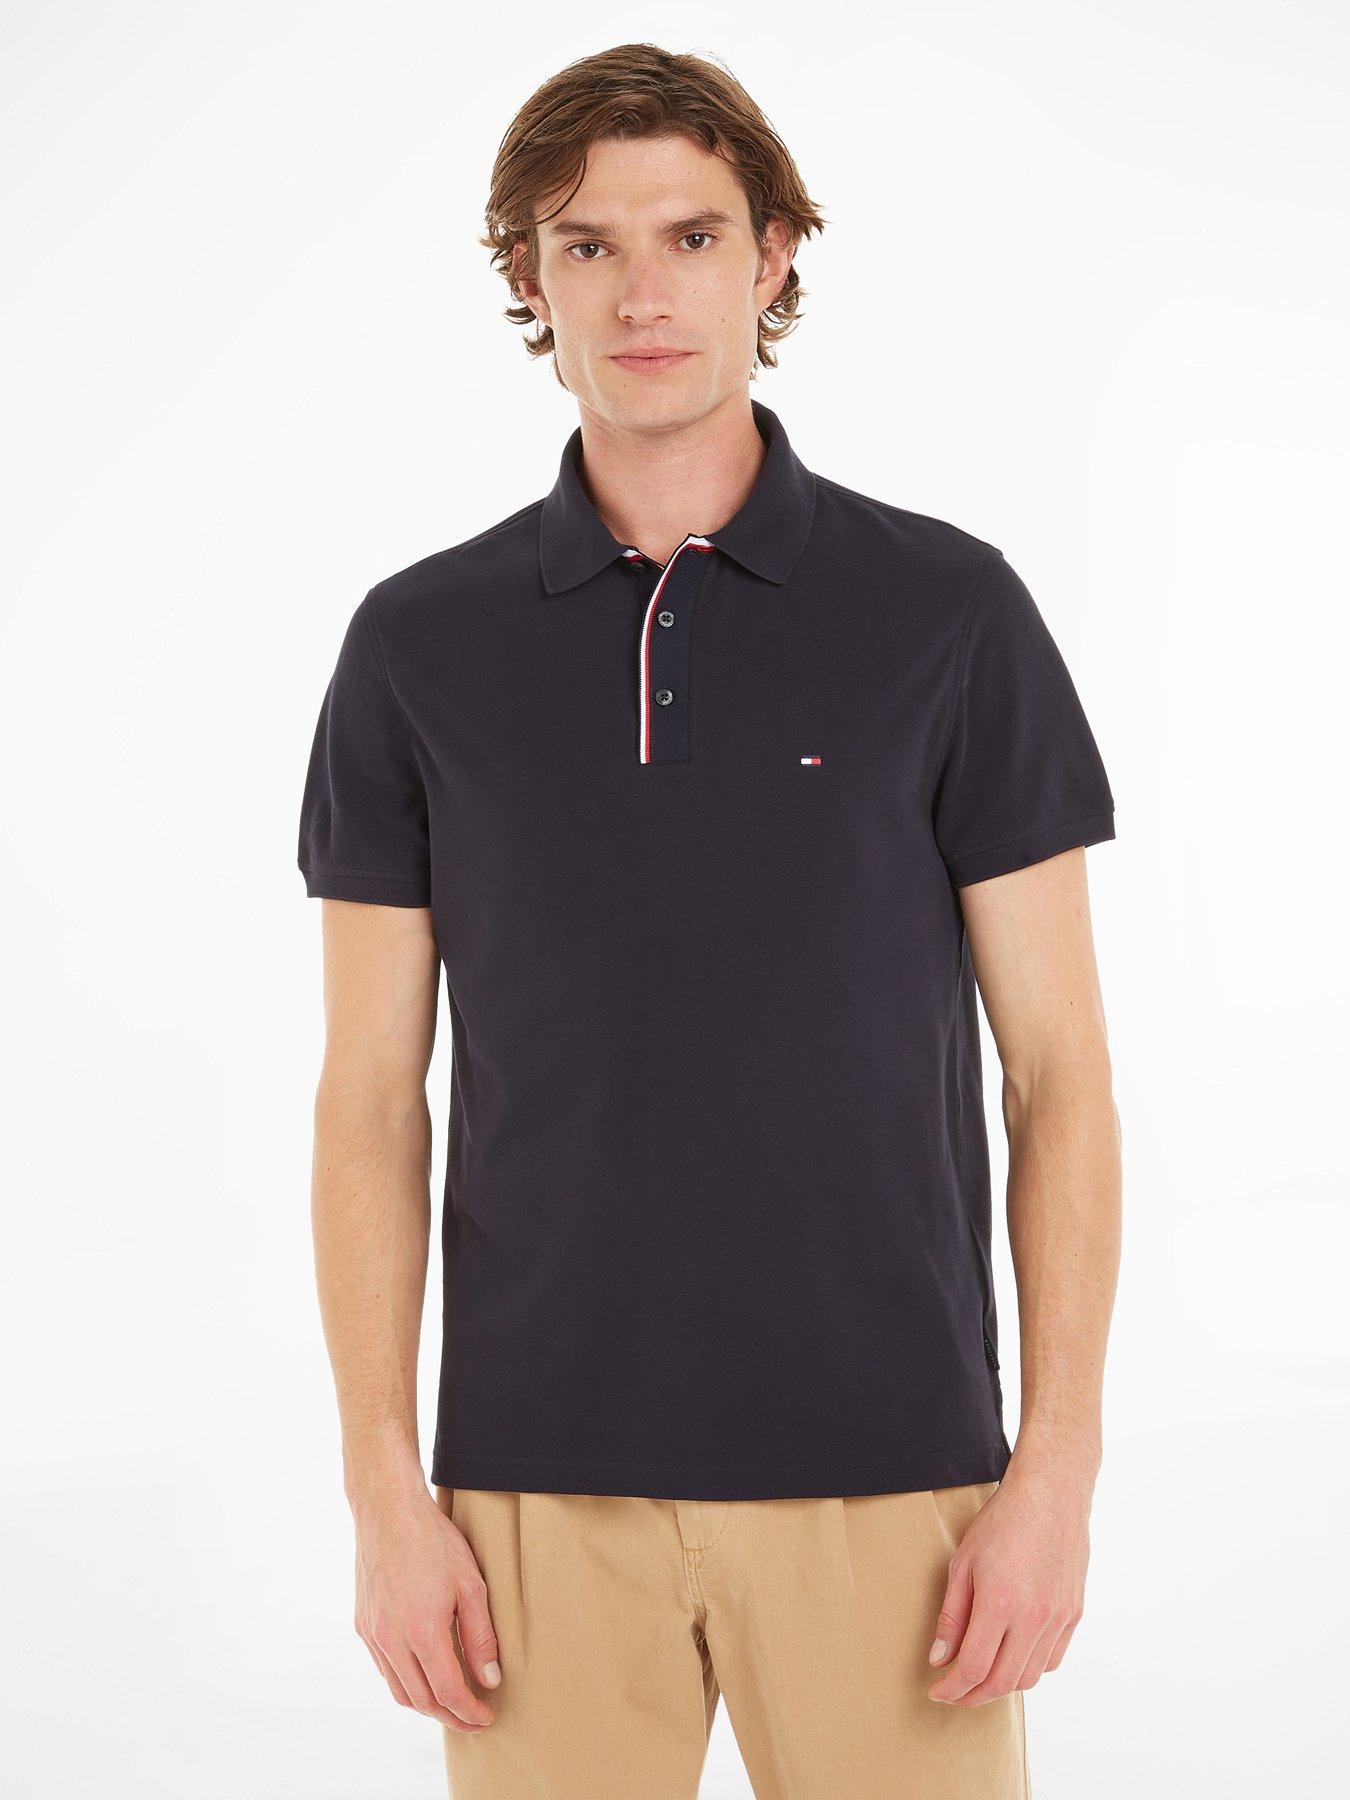 Cotton Striped Mens Tommy Hilfiger Polo Tshirt Wholesale at Rs 350